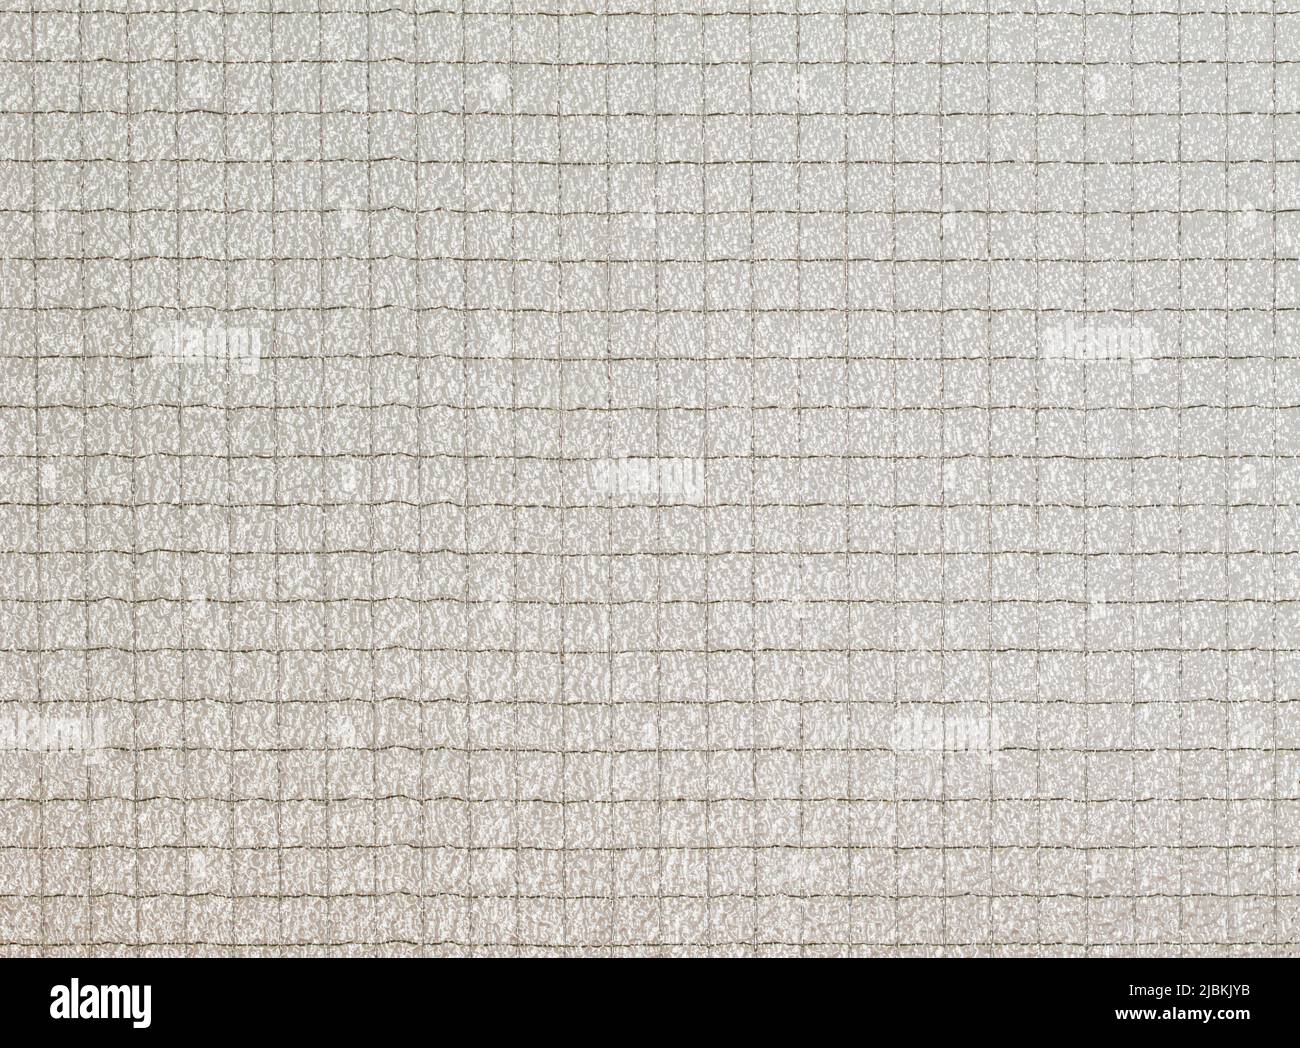 Safety wired glass texture background Stock Photo